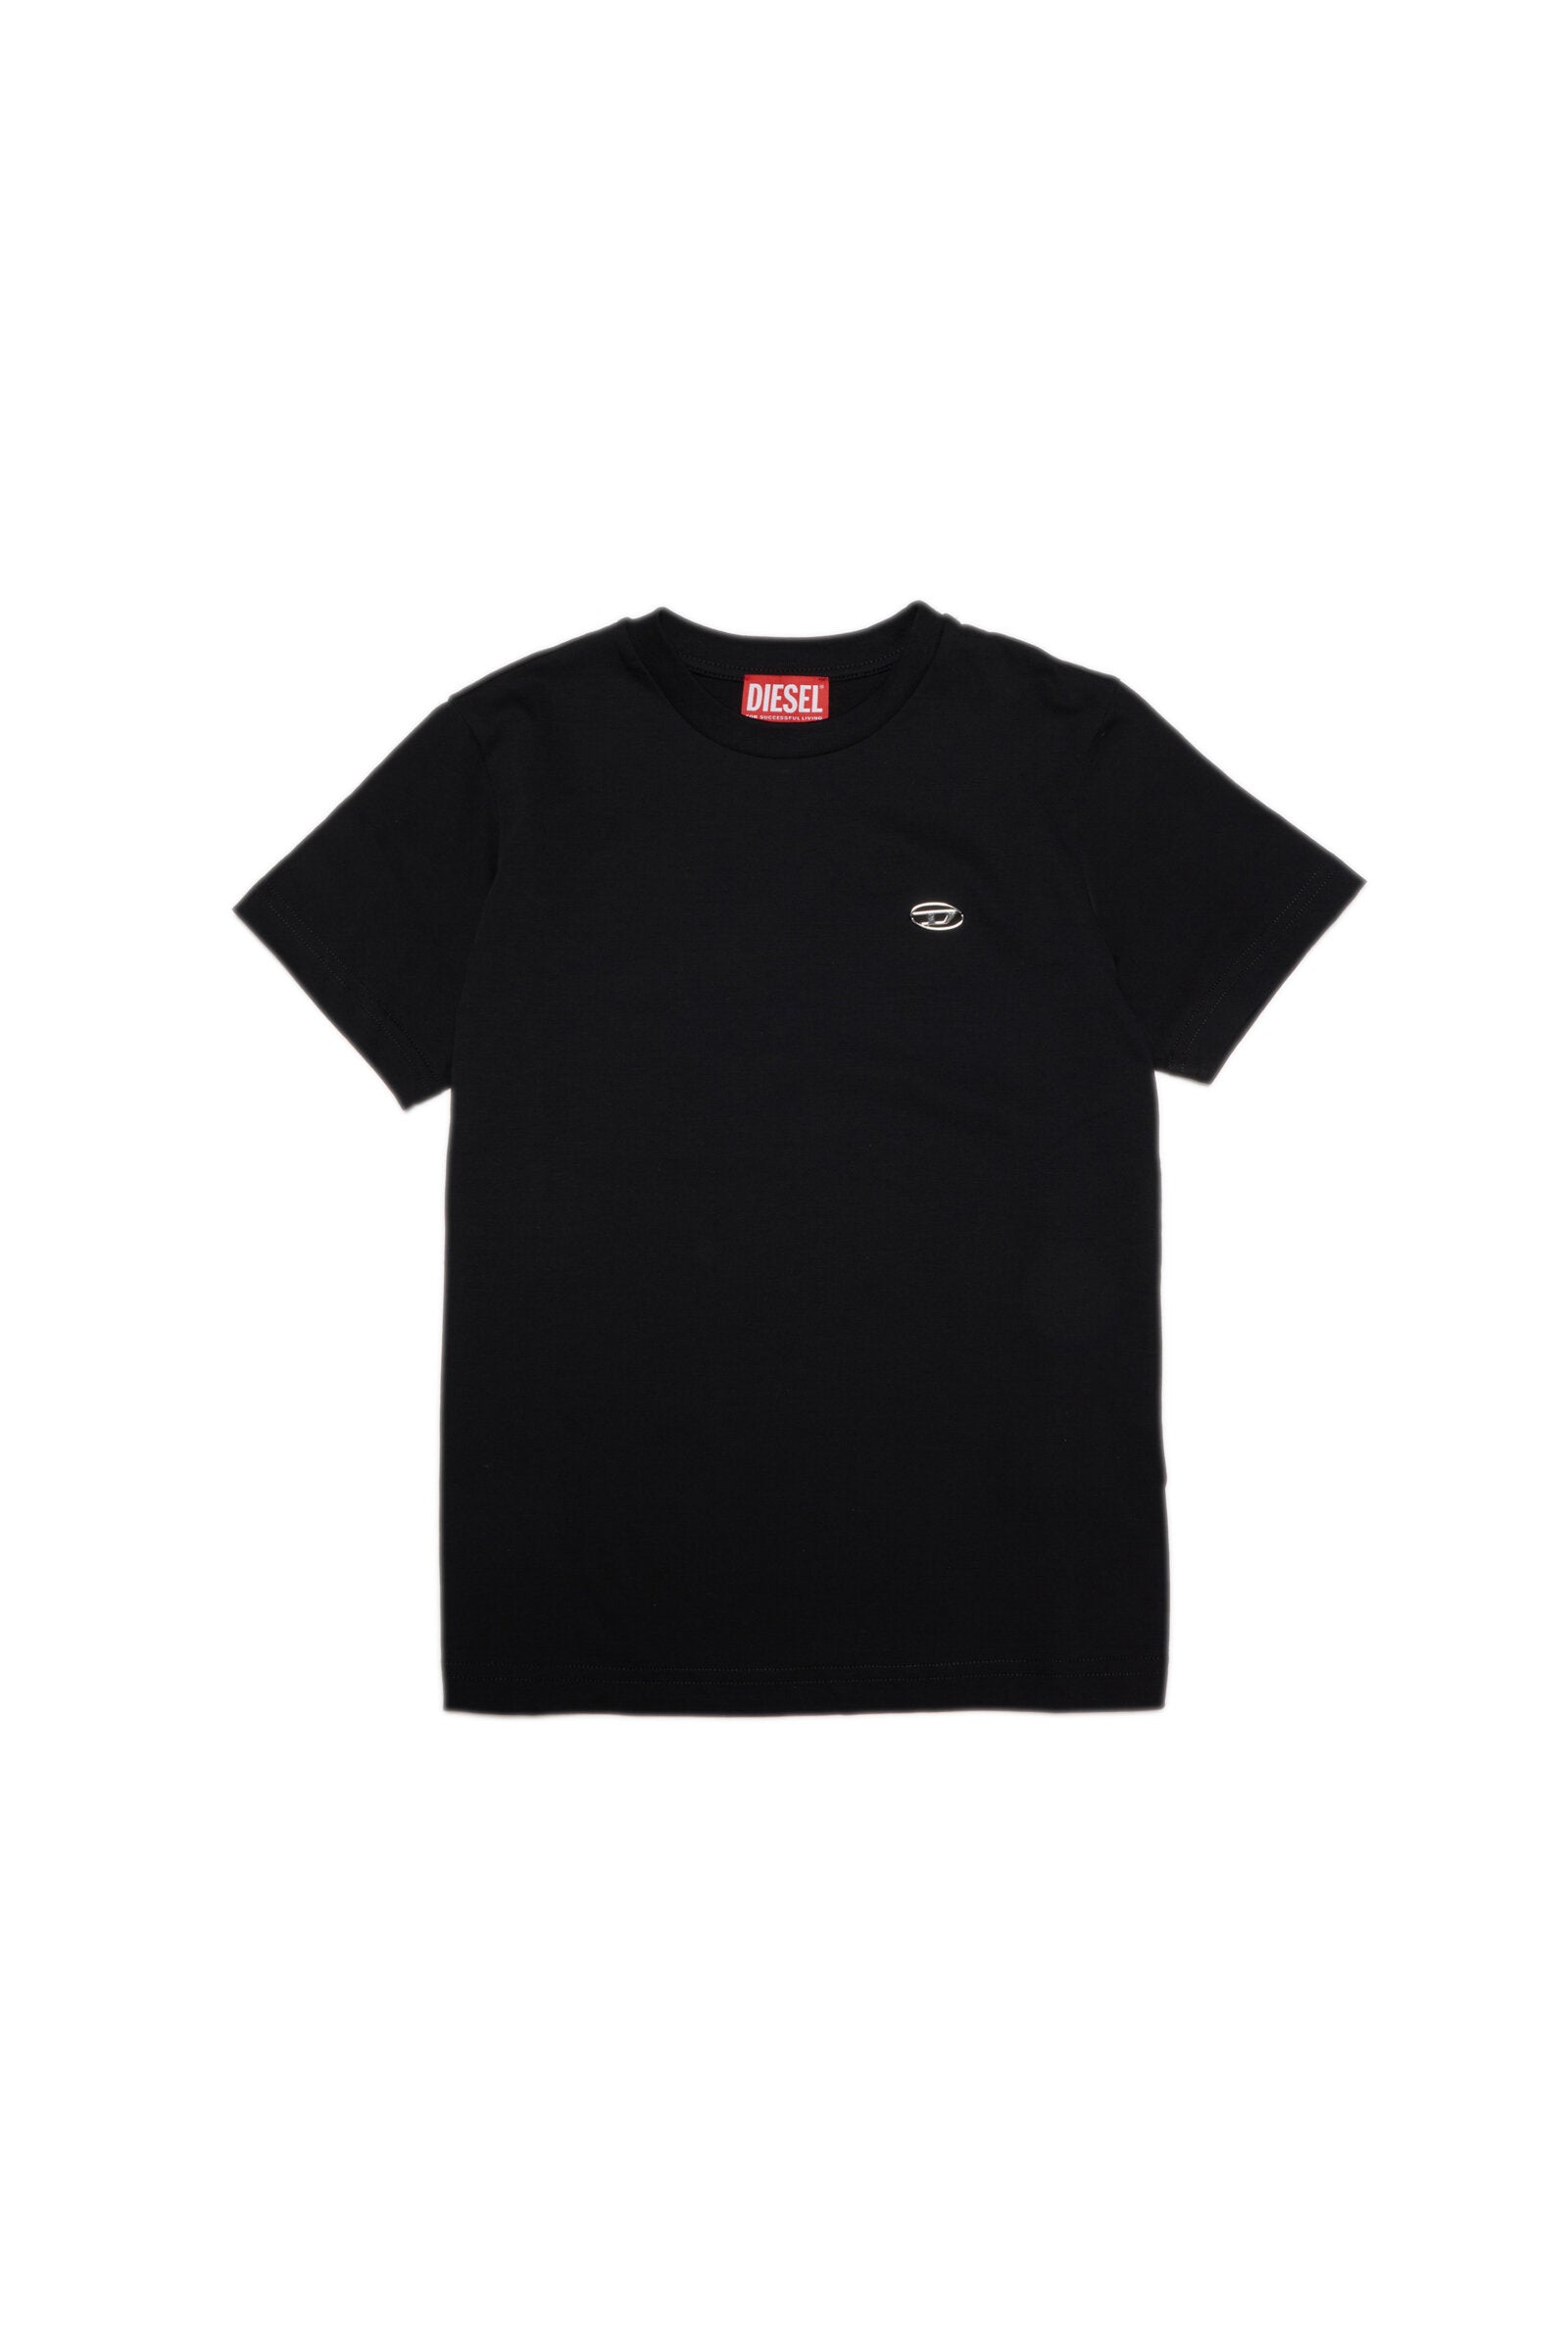 Black jersey T-shirt with metal plate oval D logo